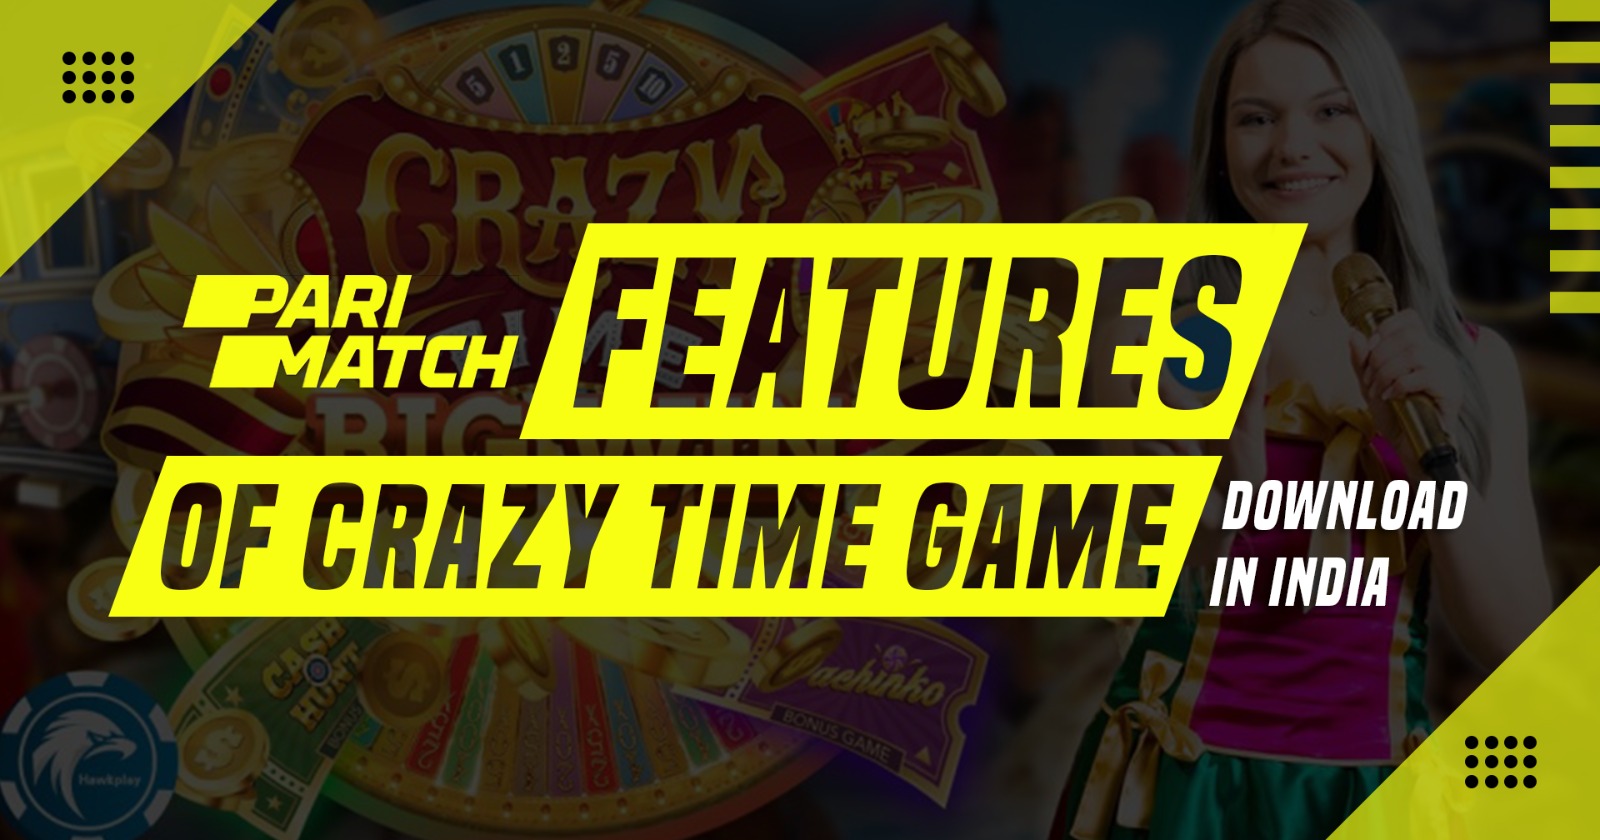 Features of Crazy Time game Download India